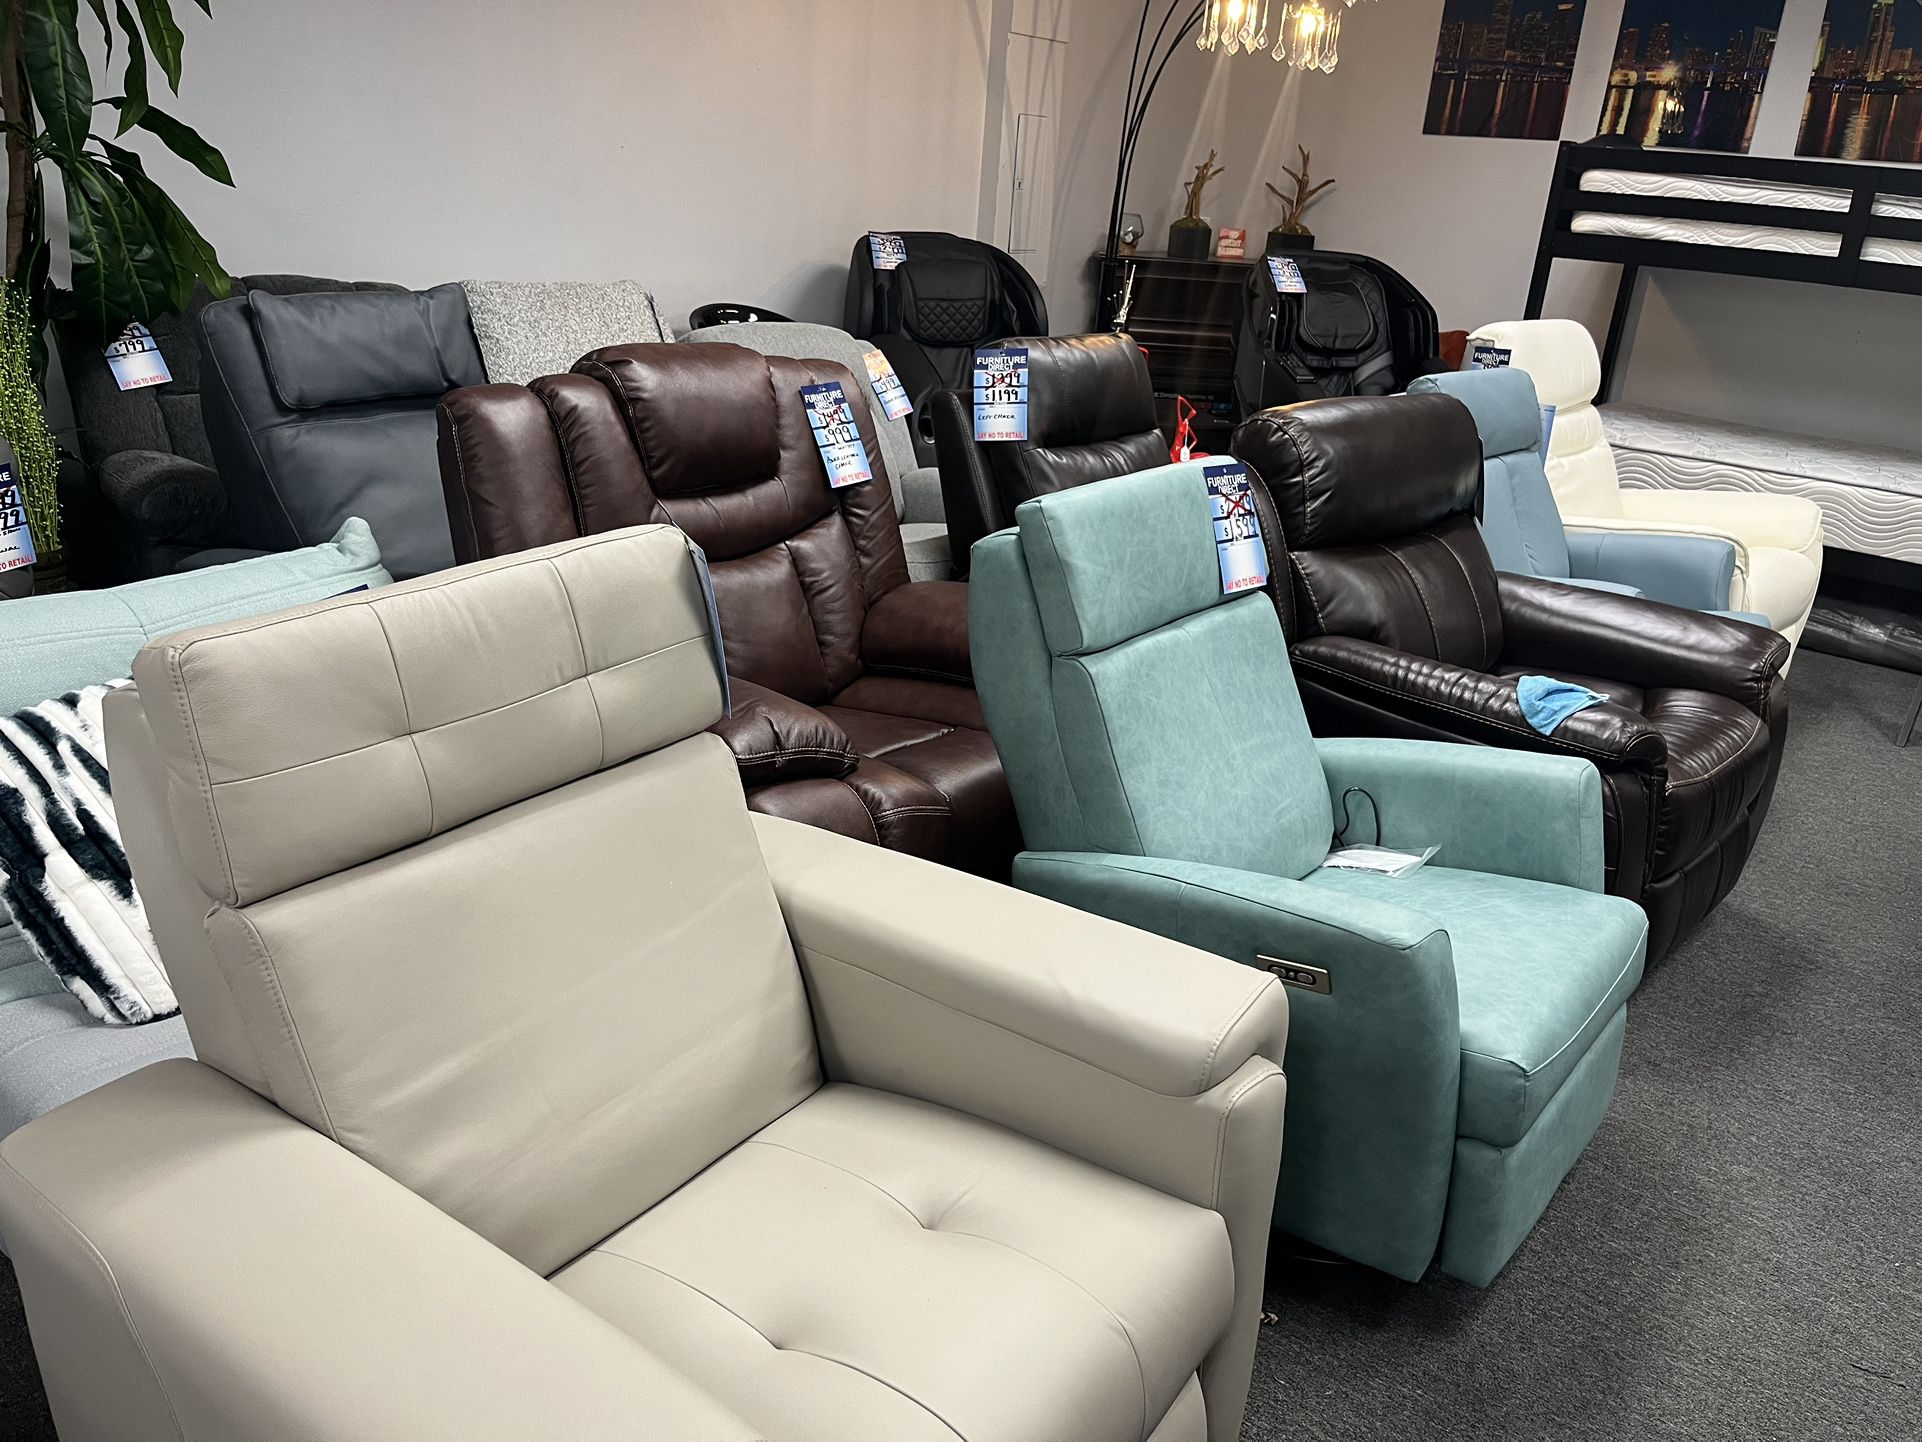 😱😱 Power Leather & Fabric Recliners !! Mothers Day Sale !!  $249 😱😱